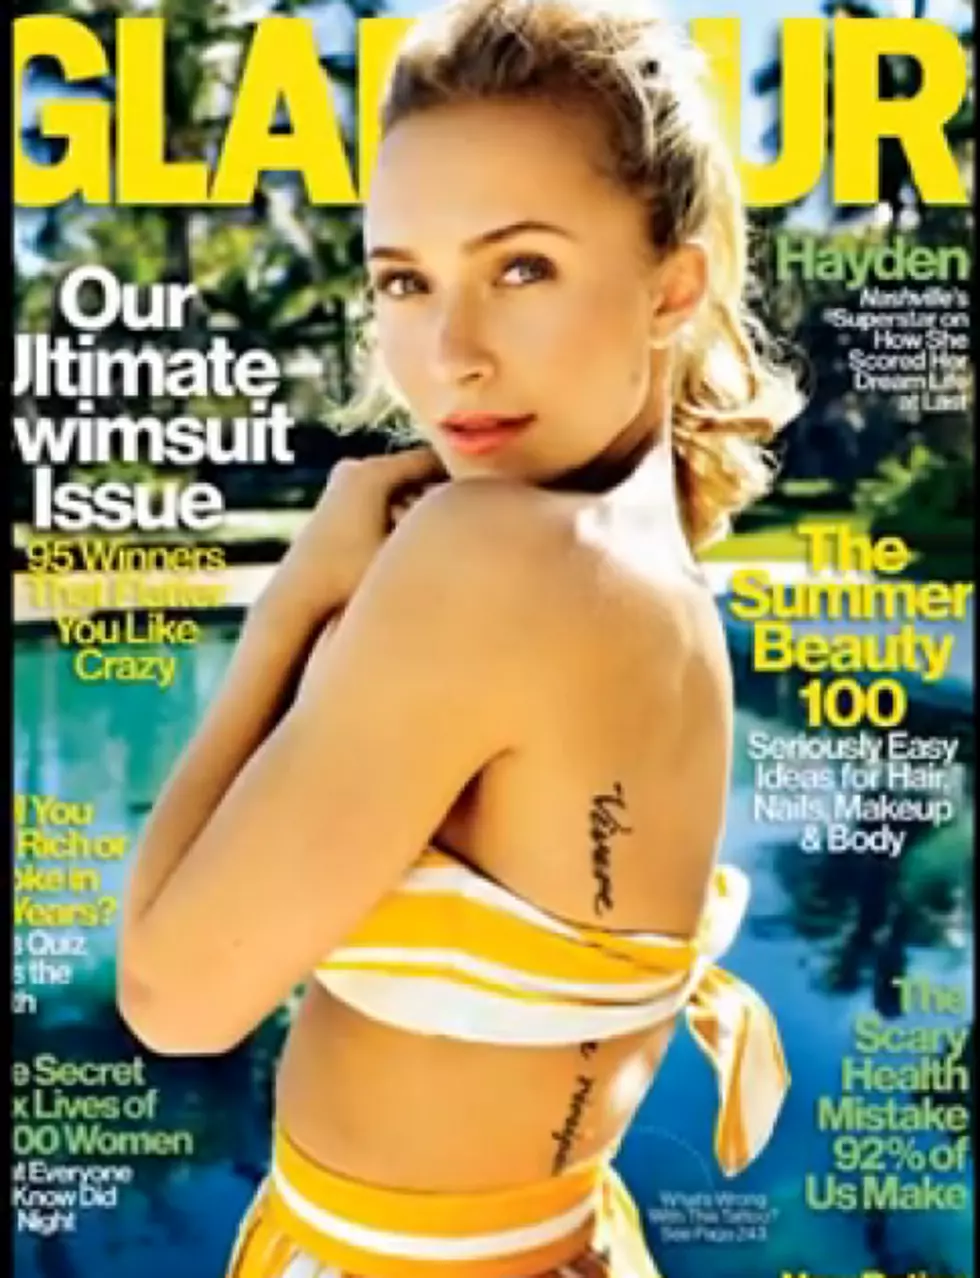 Sneak Peek at Hayden Panettiere’s Glamour Photo Shoot and Answers to Questions We’ve Always Wanted to Ask